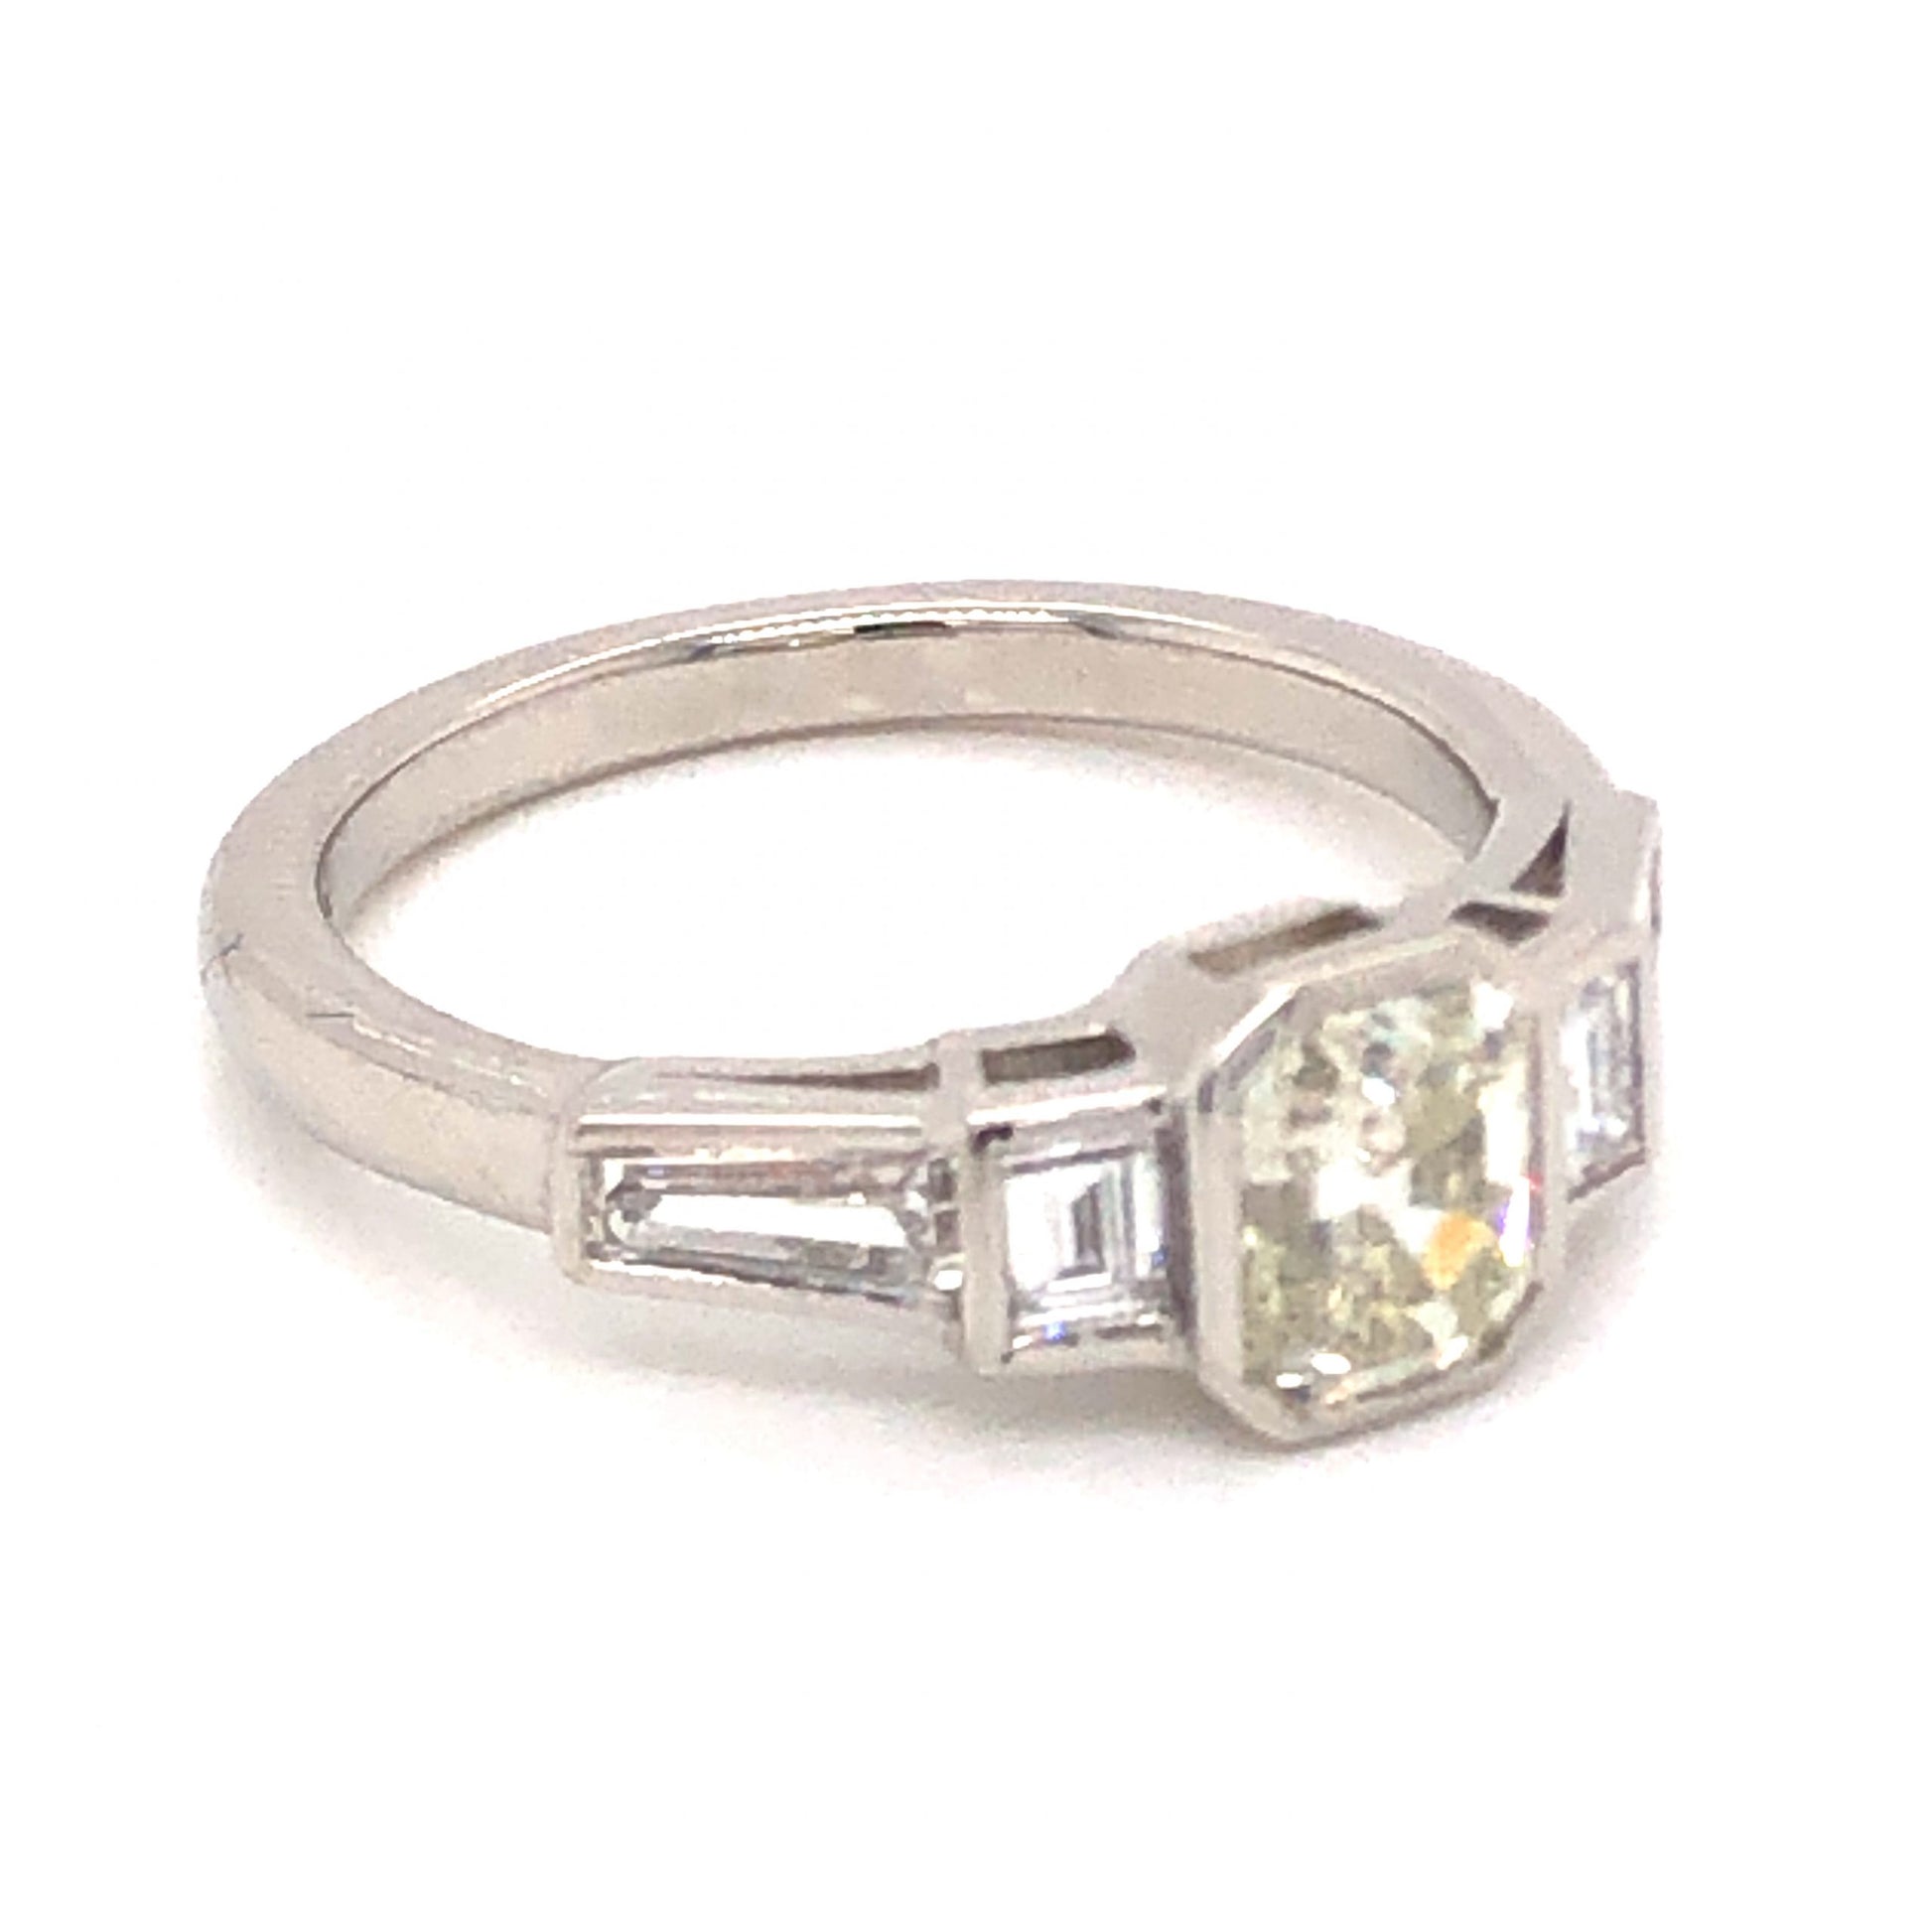 1.10 Art Deco Diamond Engagement Ring in PlatinumComposition: Platinum Ring Size: 6 Total Diamond Weight: 1.80ct Total Gram Weight: 5.4 g Inscription: PLAT
      